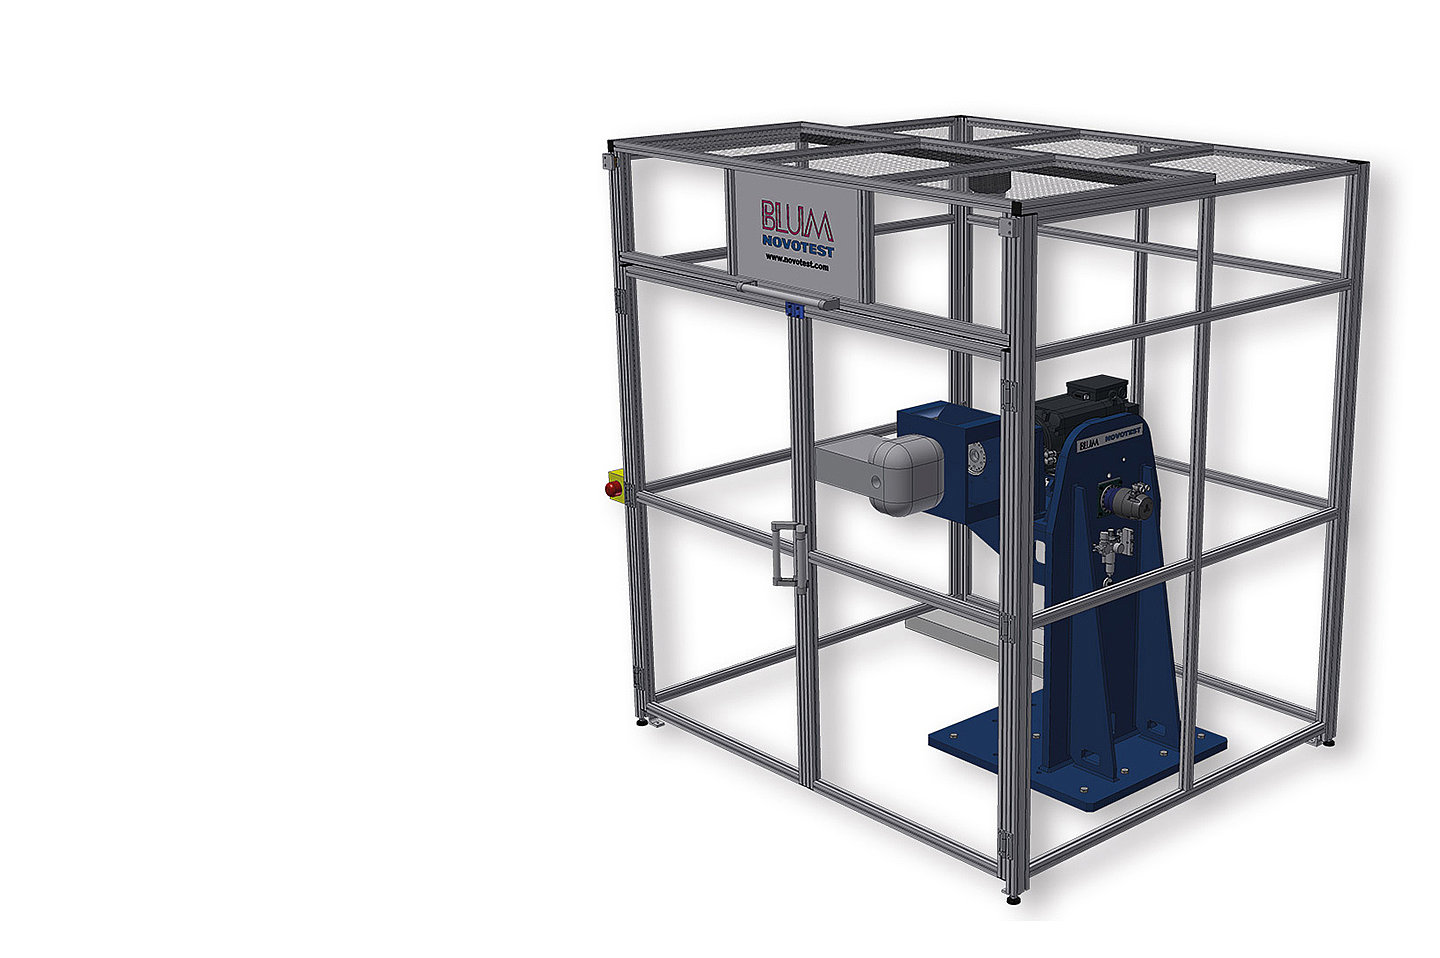 Swing test stand from Blum-Novotest for simulating the movements of a transmission 